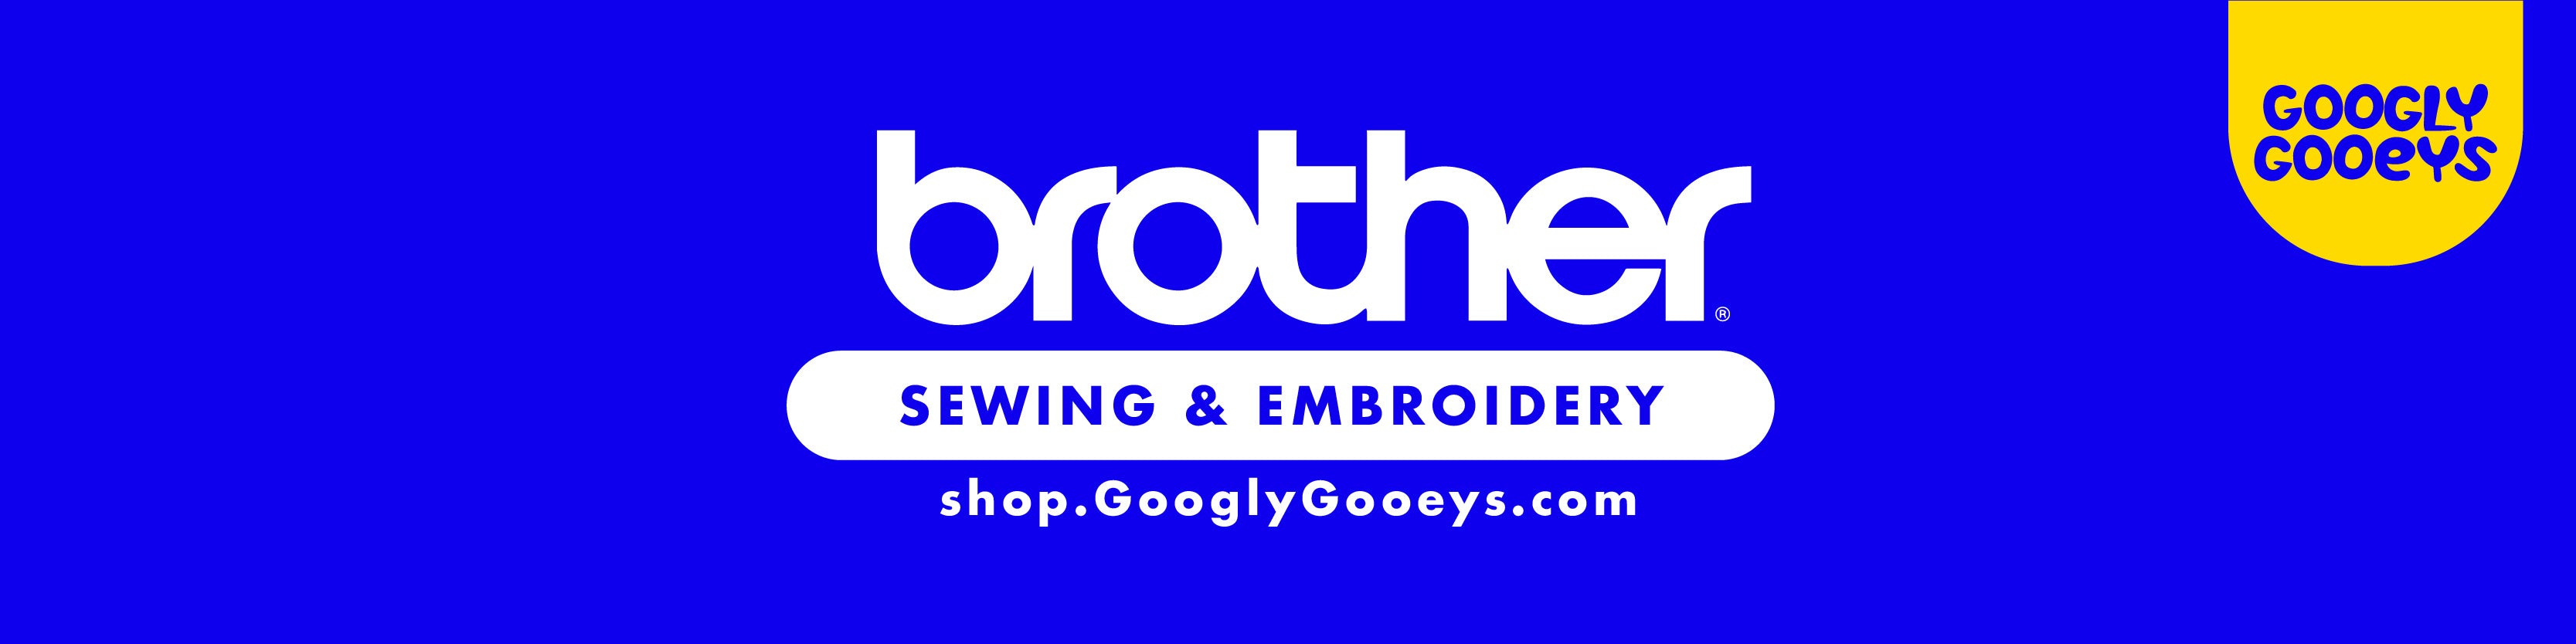 Googly Gooeys Shop - Brother Sewing and Embroidery Machines